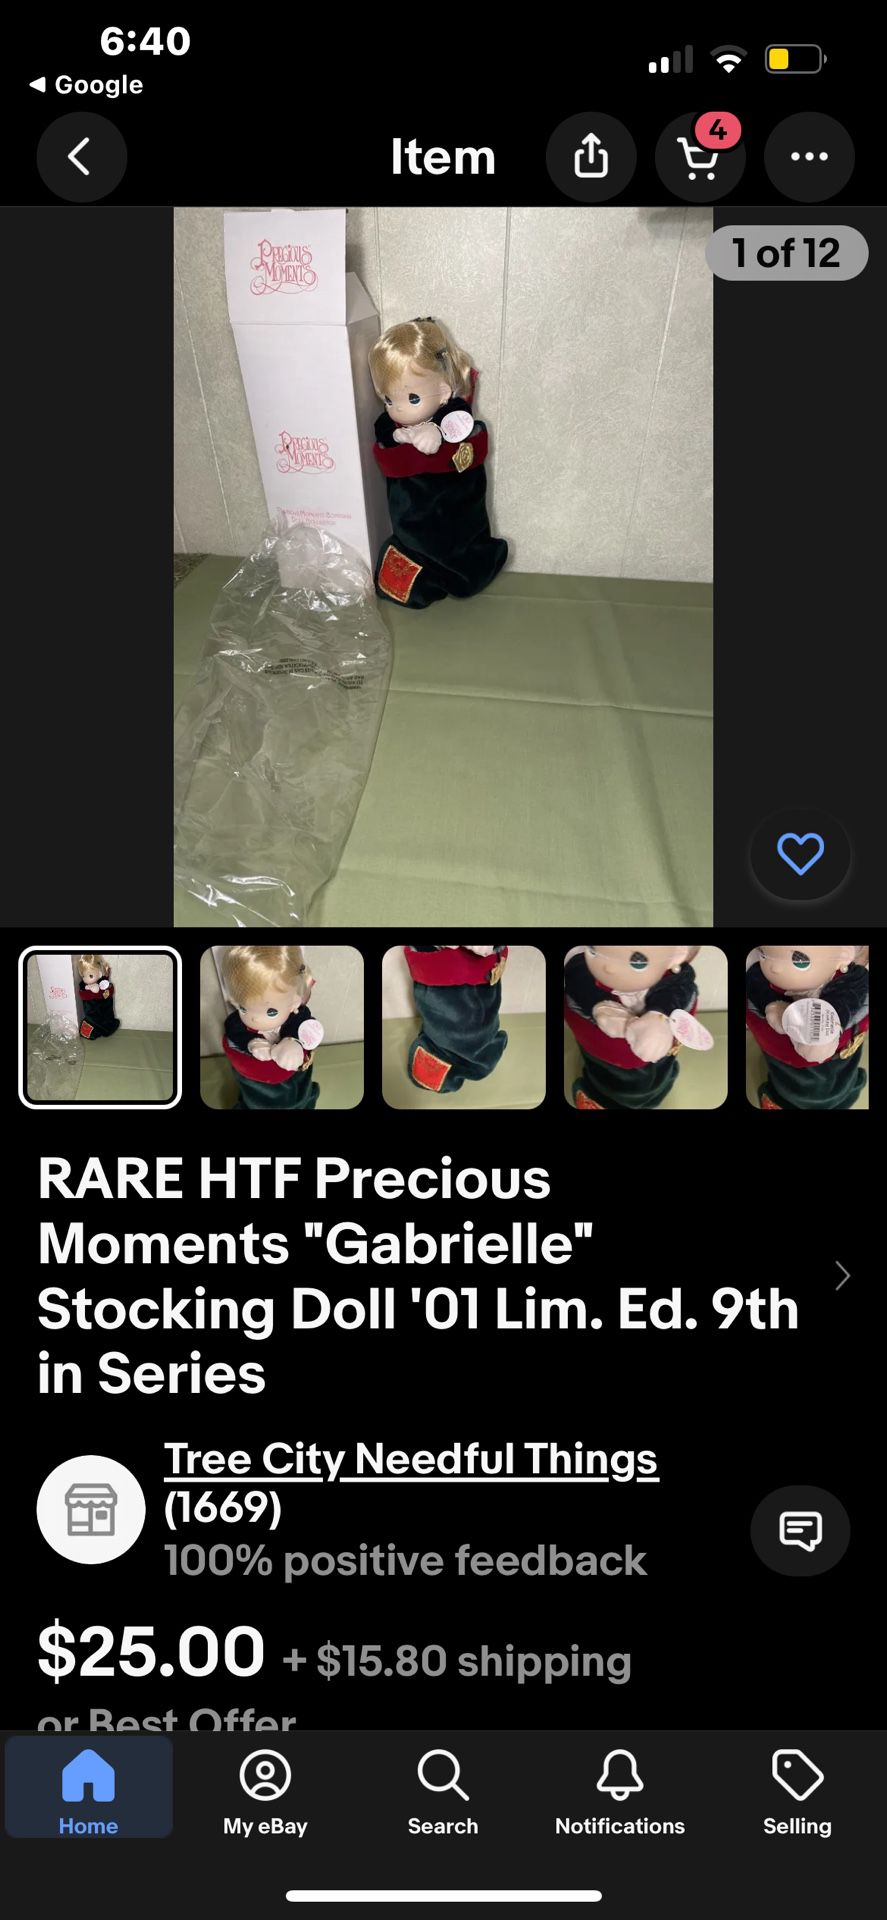 Collectible, Precious Moments Doll Comes With Stocking. We’re Fine Ninth Edition